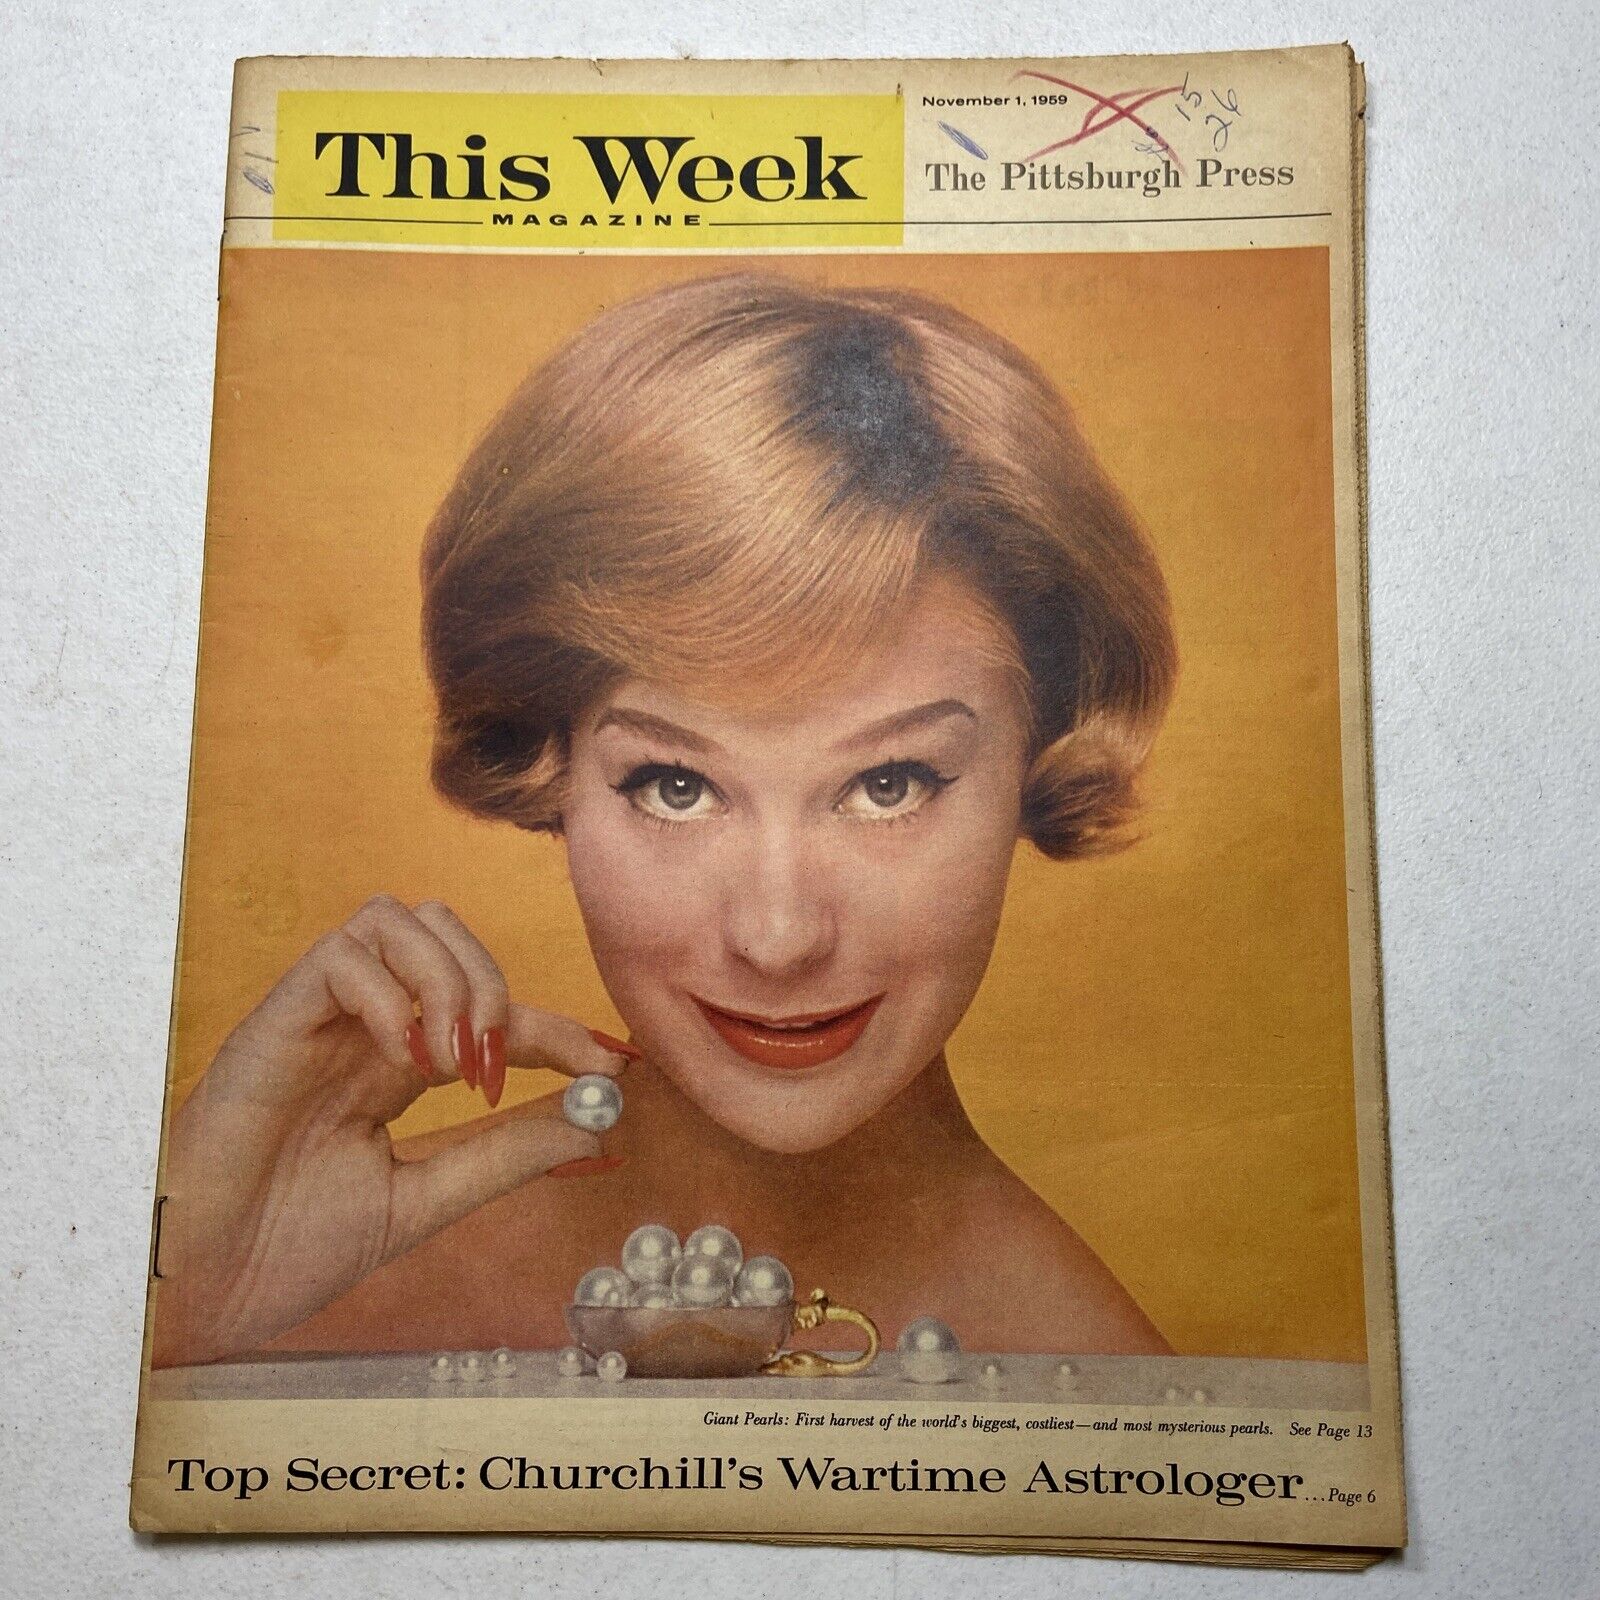 THIS WEEK Magazine - November 1, 1959 - Churchill's Astrologer, Marie Curie 